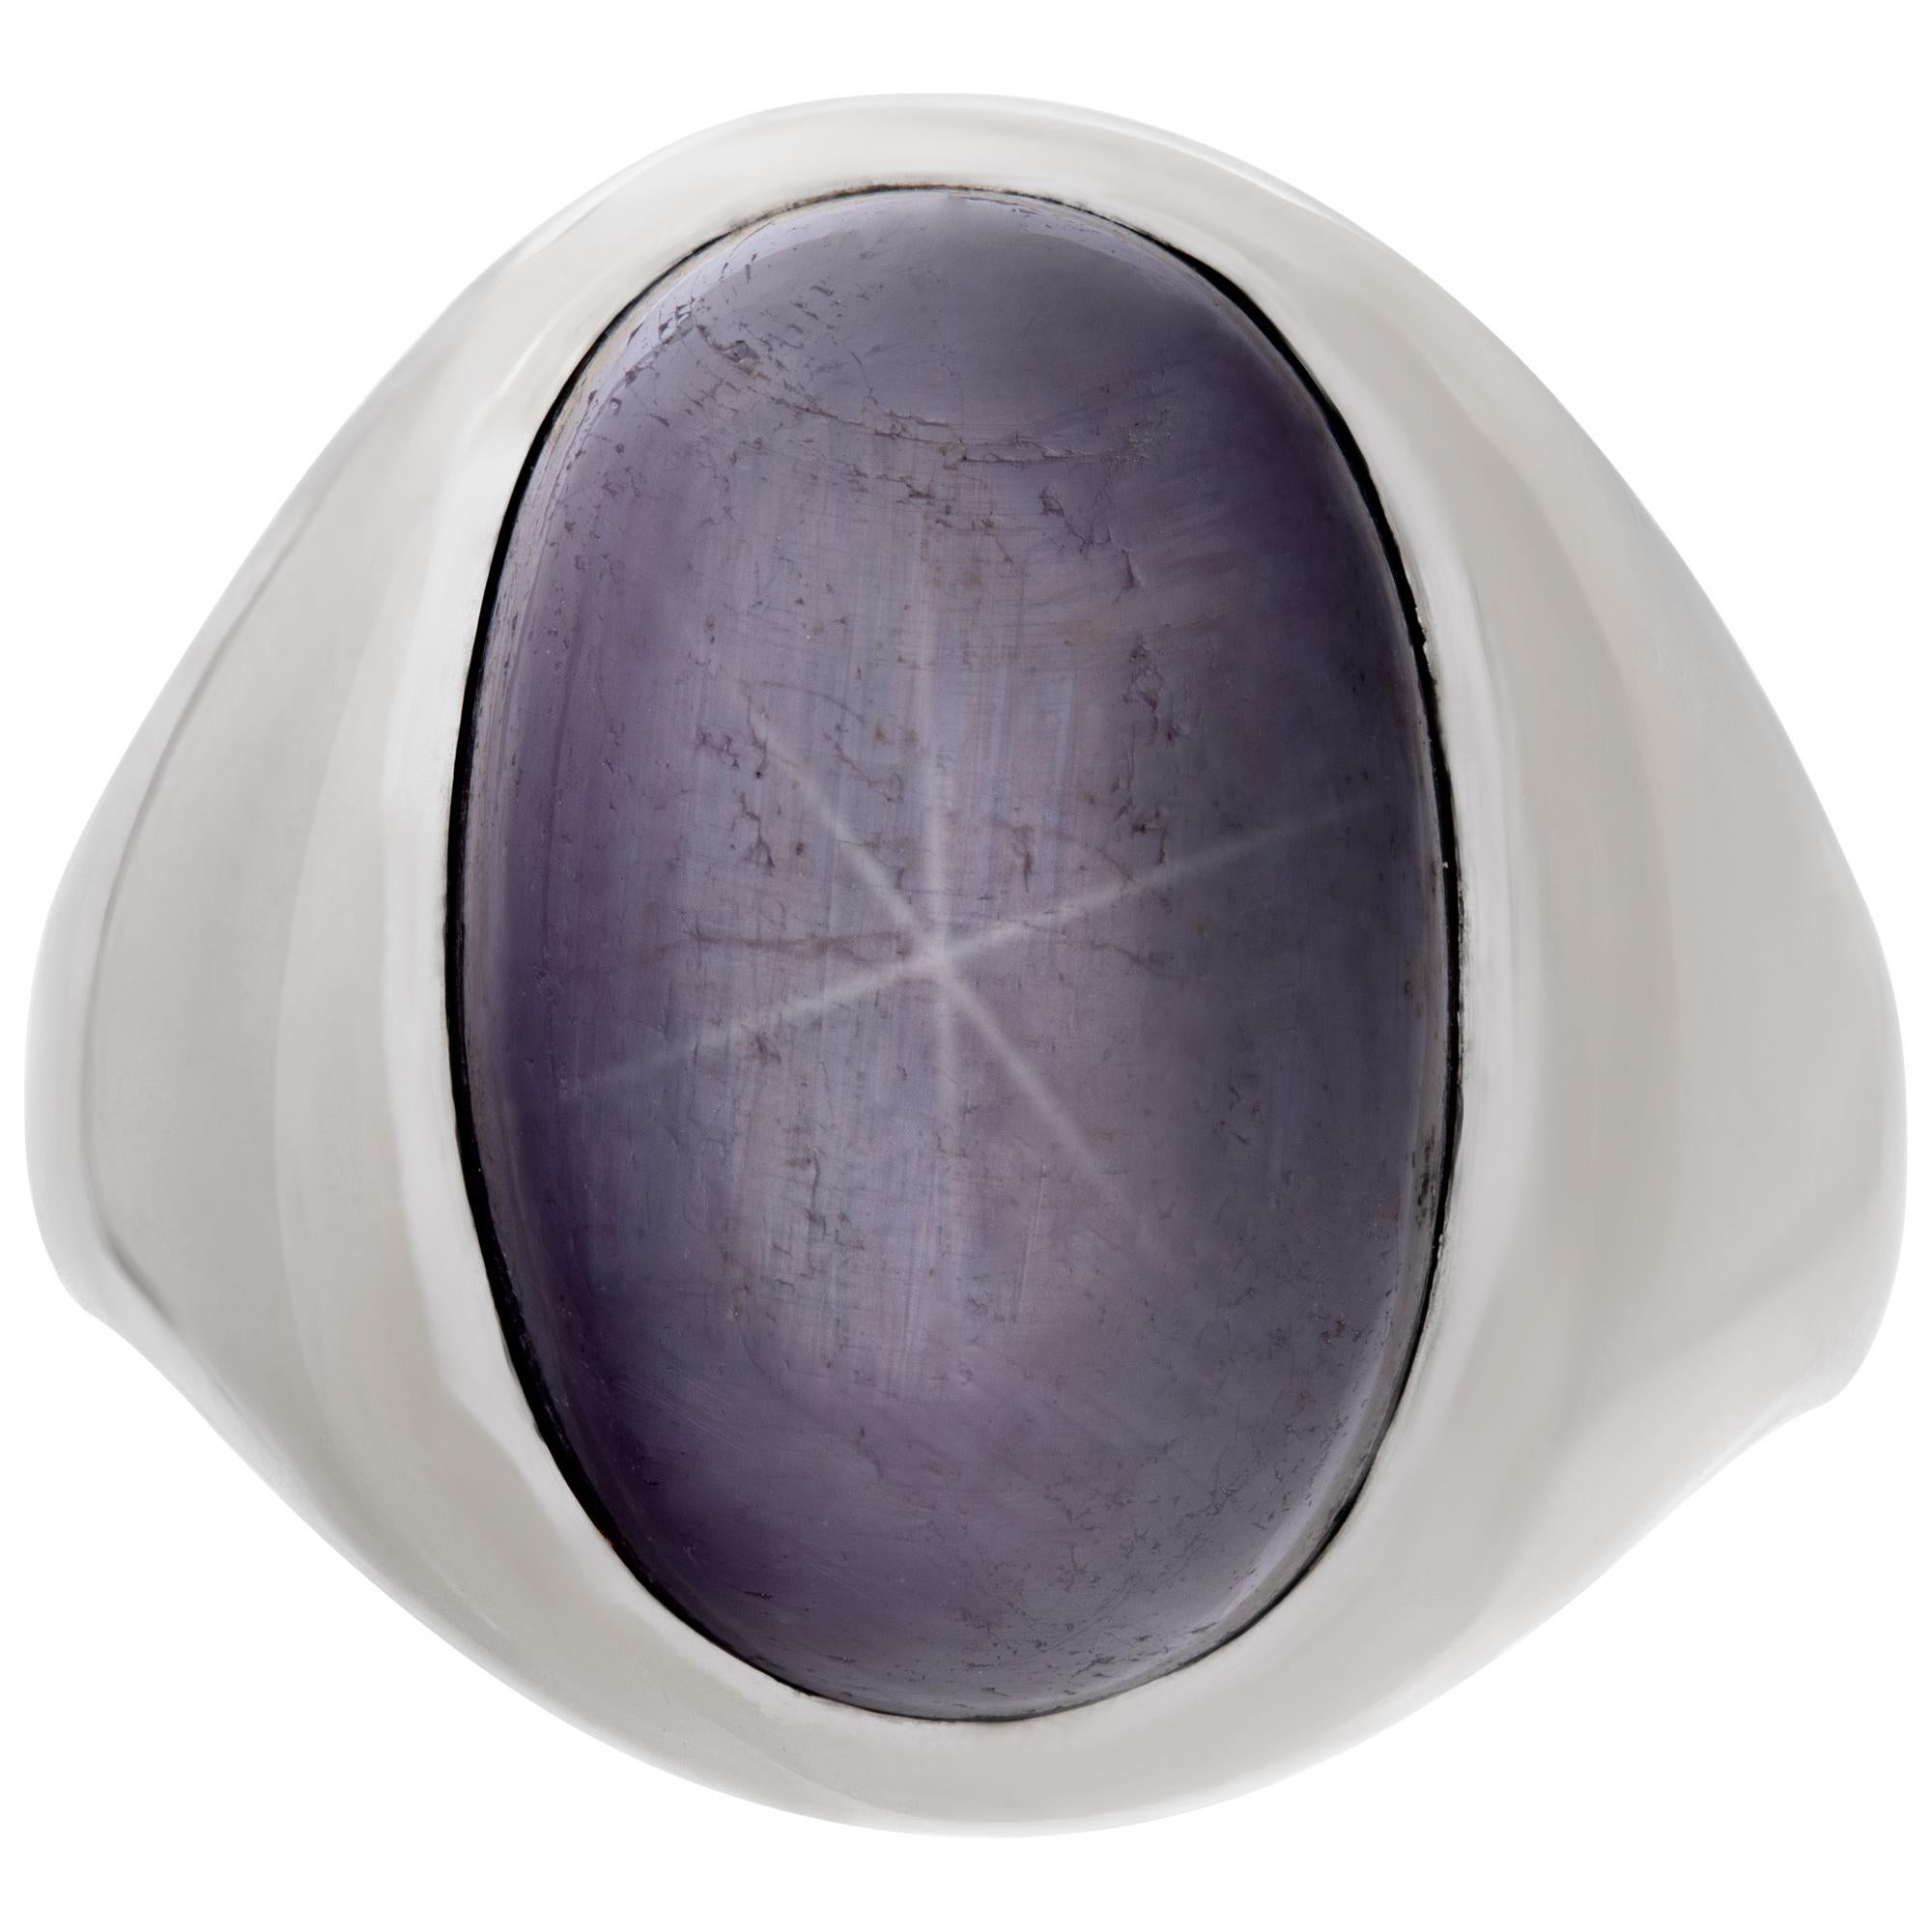 Oval cabochon plum star-sapphire ring set in 14k white gold; size 5This Sapphire ring is currently size 5 and some items can be sized up or down, please ask! It weighs 10.9 pennyweights and is 14k White Gold.
